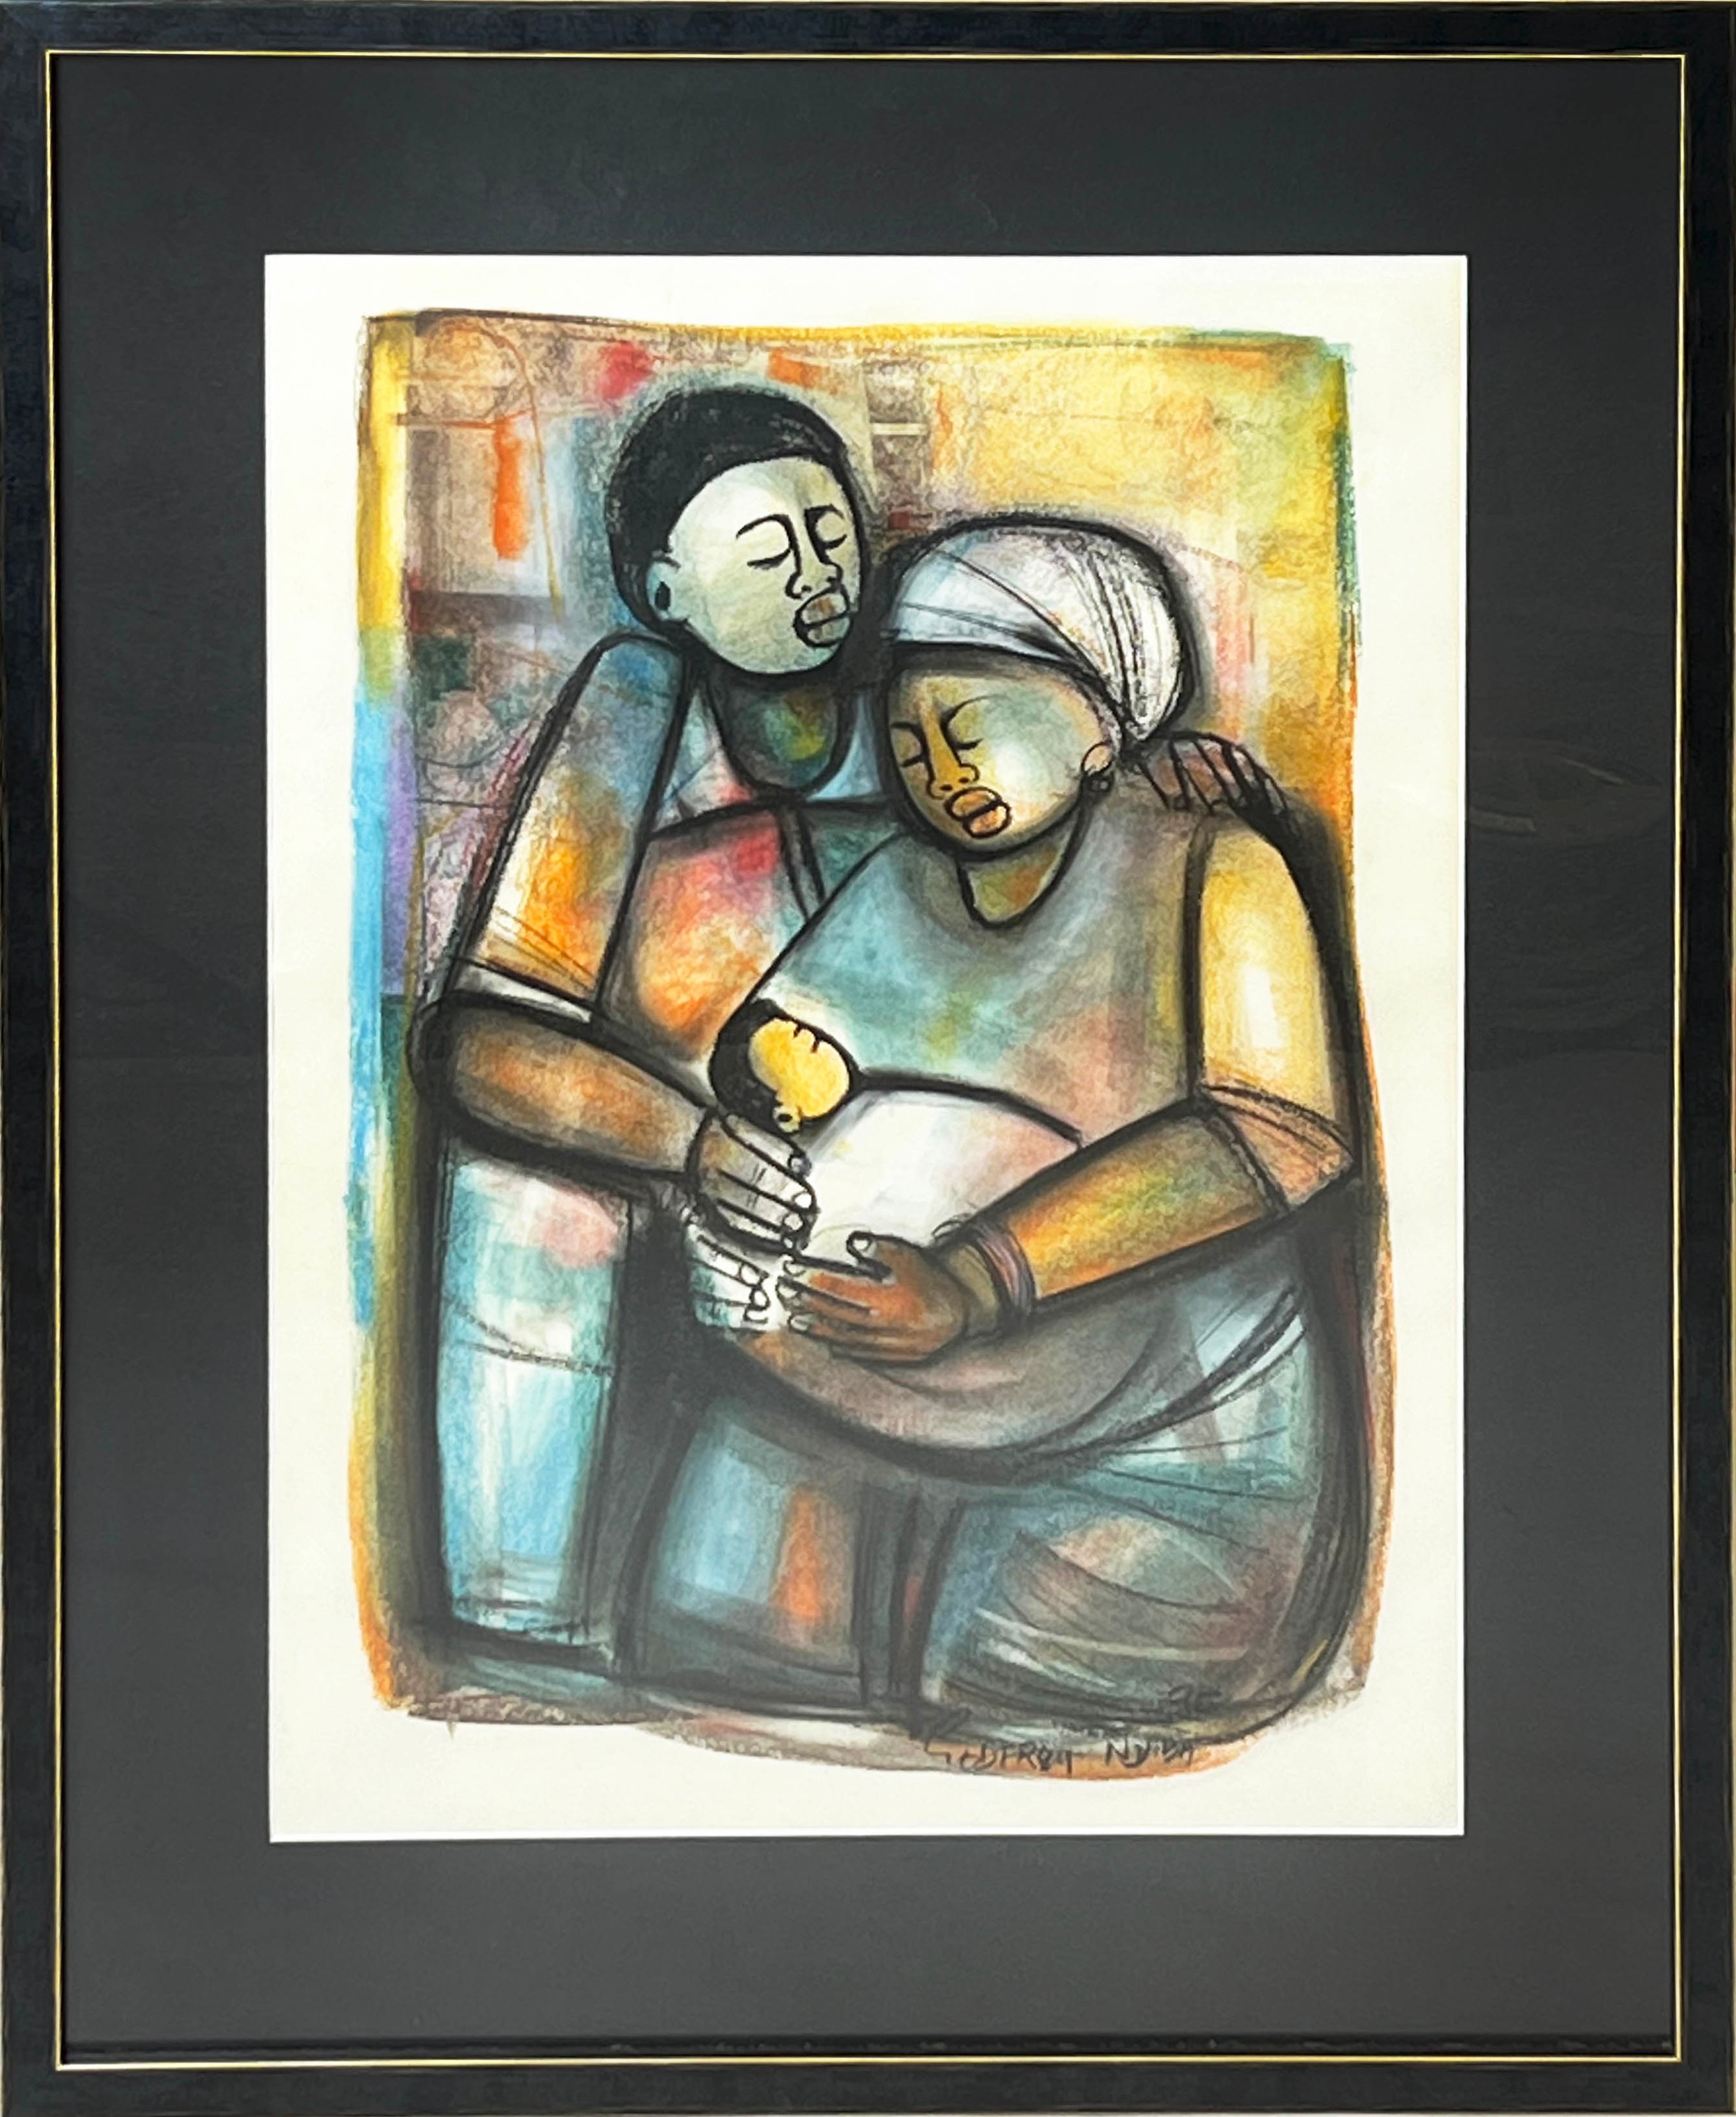 GODFREY NDABA (born 1947, South Africa) 'Family', crayon and water colour, 53cm x 40cm, signed and